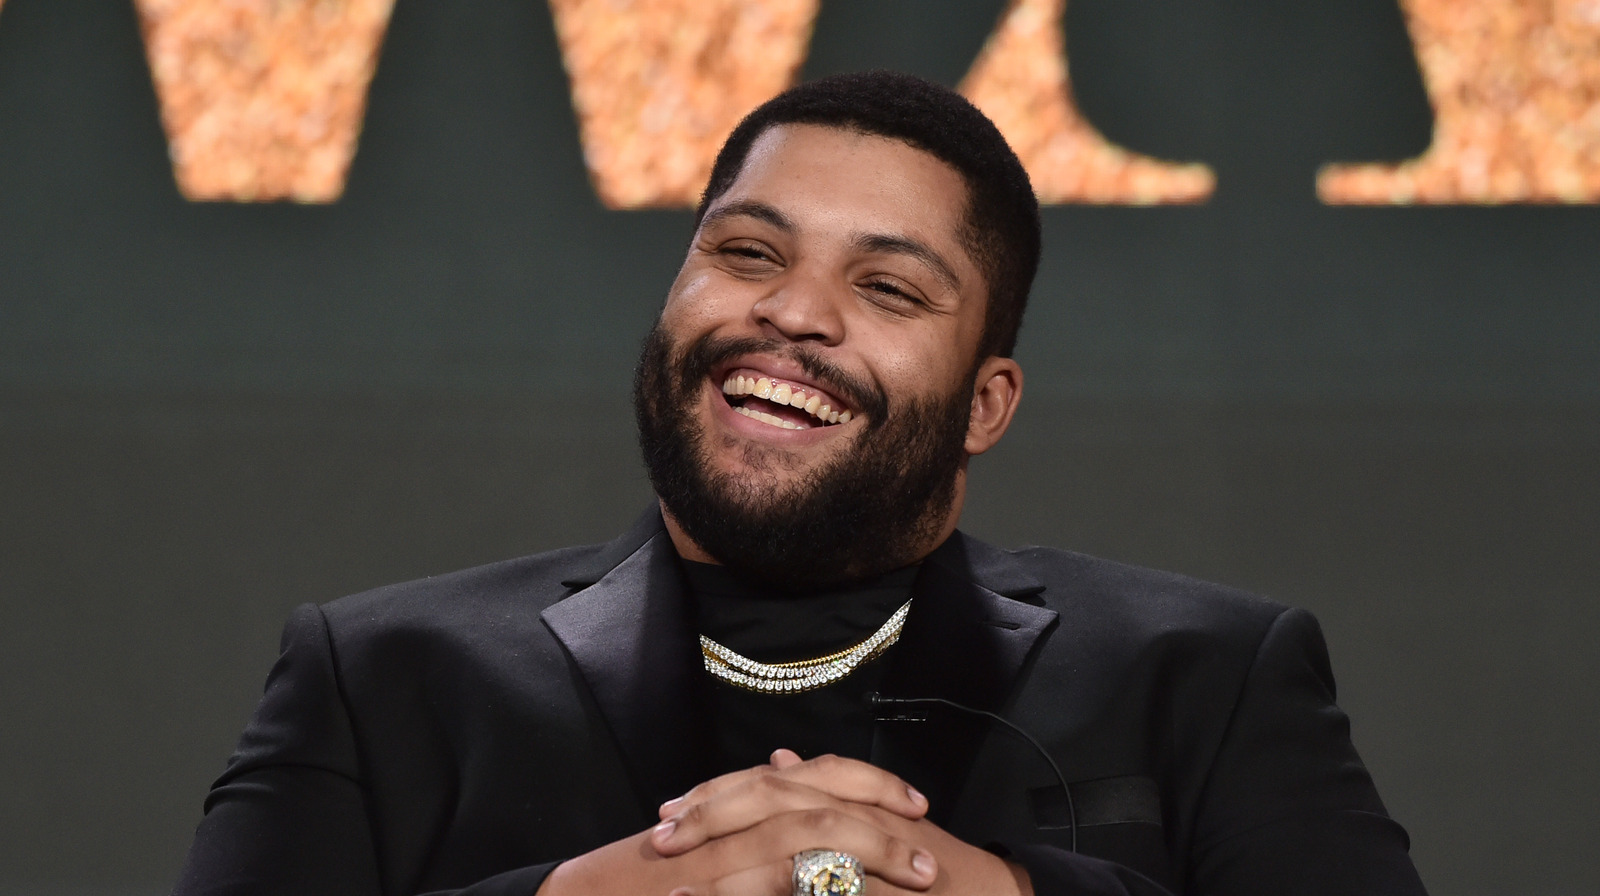 O'Shea Jackson Jr. Discusses Relationship With WWE Star CM Punk